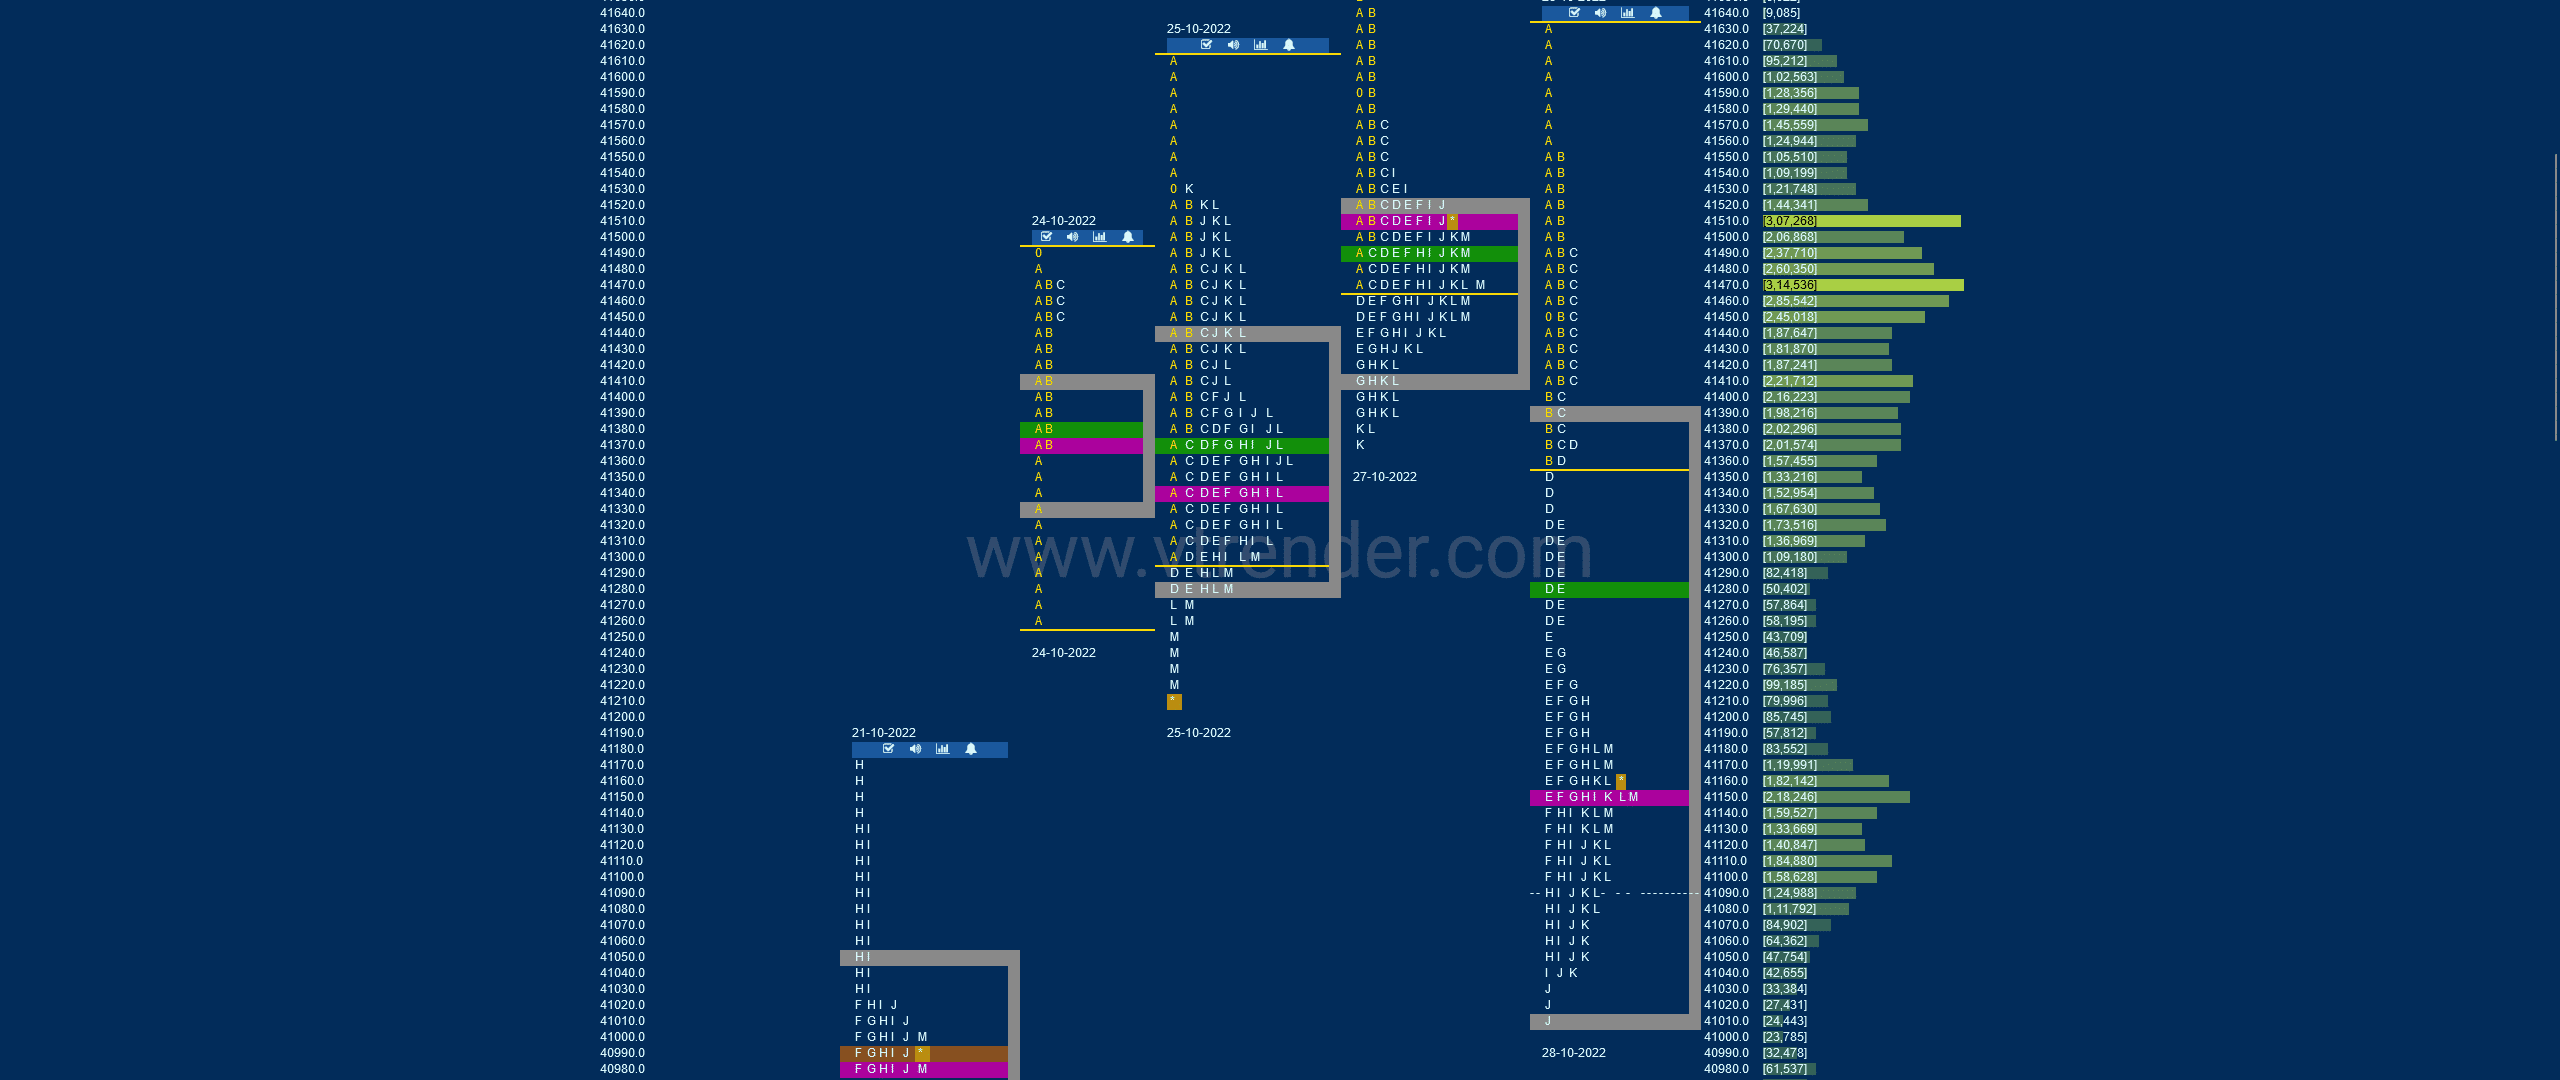 Bnf 17 Market Profile Analysis Dated 28Th Oct 2022 Banknifty Futures, Charts, Day Trading, Intraday Trading, Intraday Trading Strategies, Market Profile, Market Profile Trading Strategies, Nifty Futures, Order Flow Analysis, Support And Resistance, Technical Analysis, Trading Strategies, Volume Profile Trading